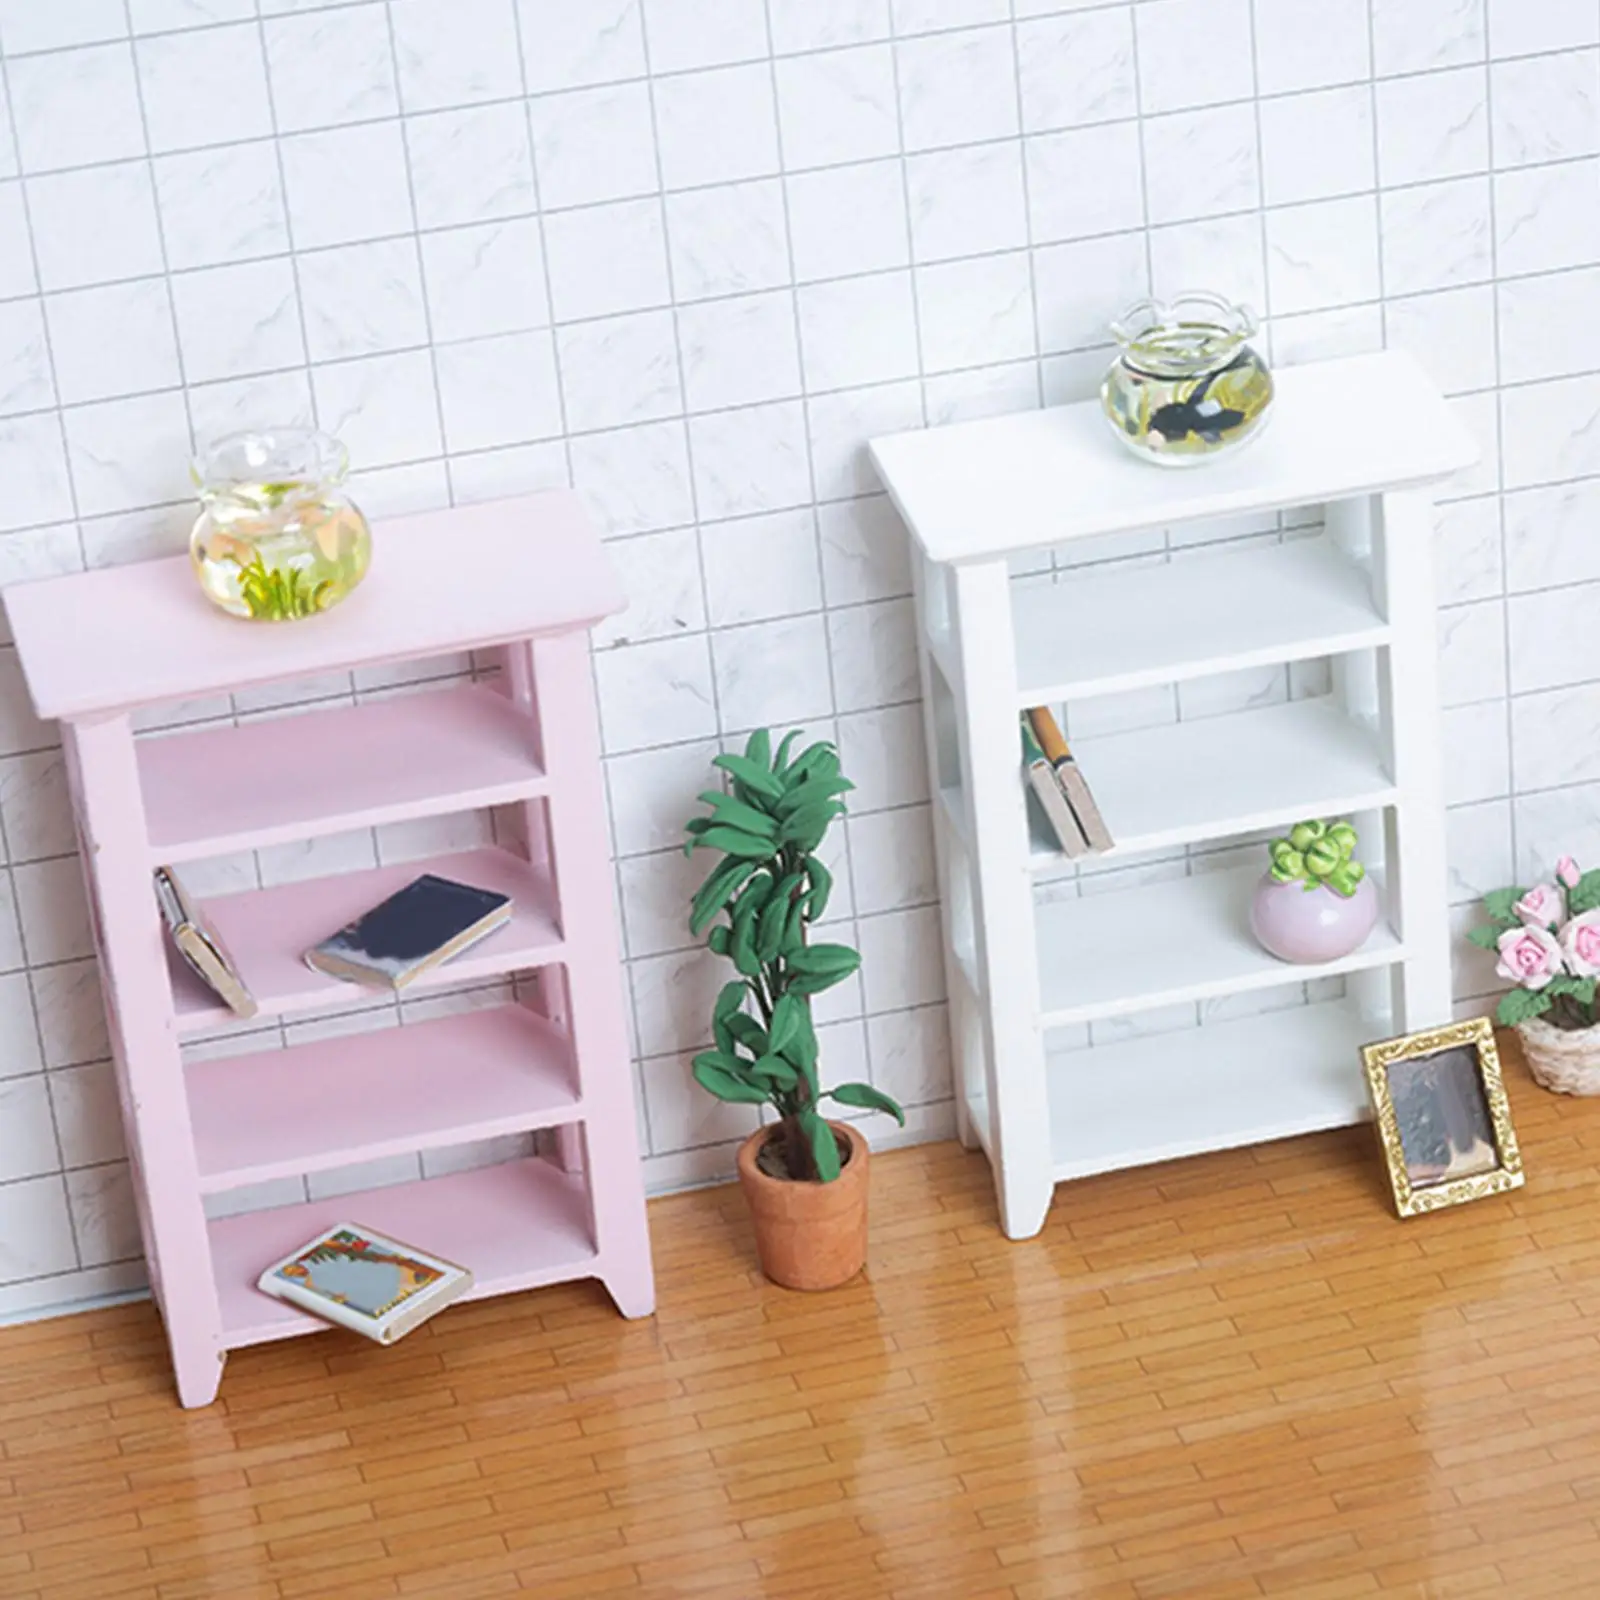 Wooden Dollhouse Miniature Shelf Decor Multi-Layer Storage Rack Girls Gifts Accessories for Dining Bathroom Study Living Room